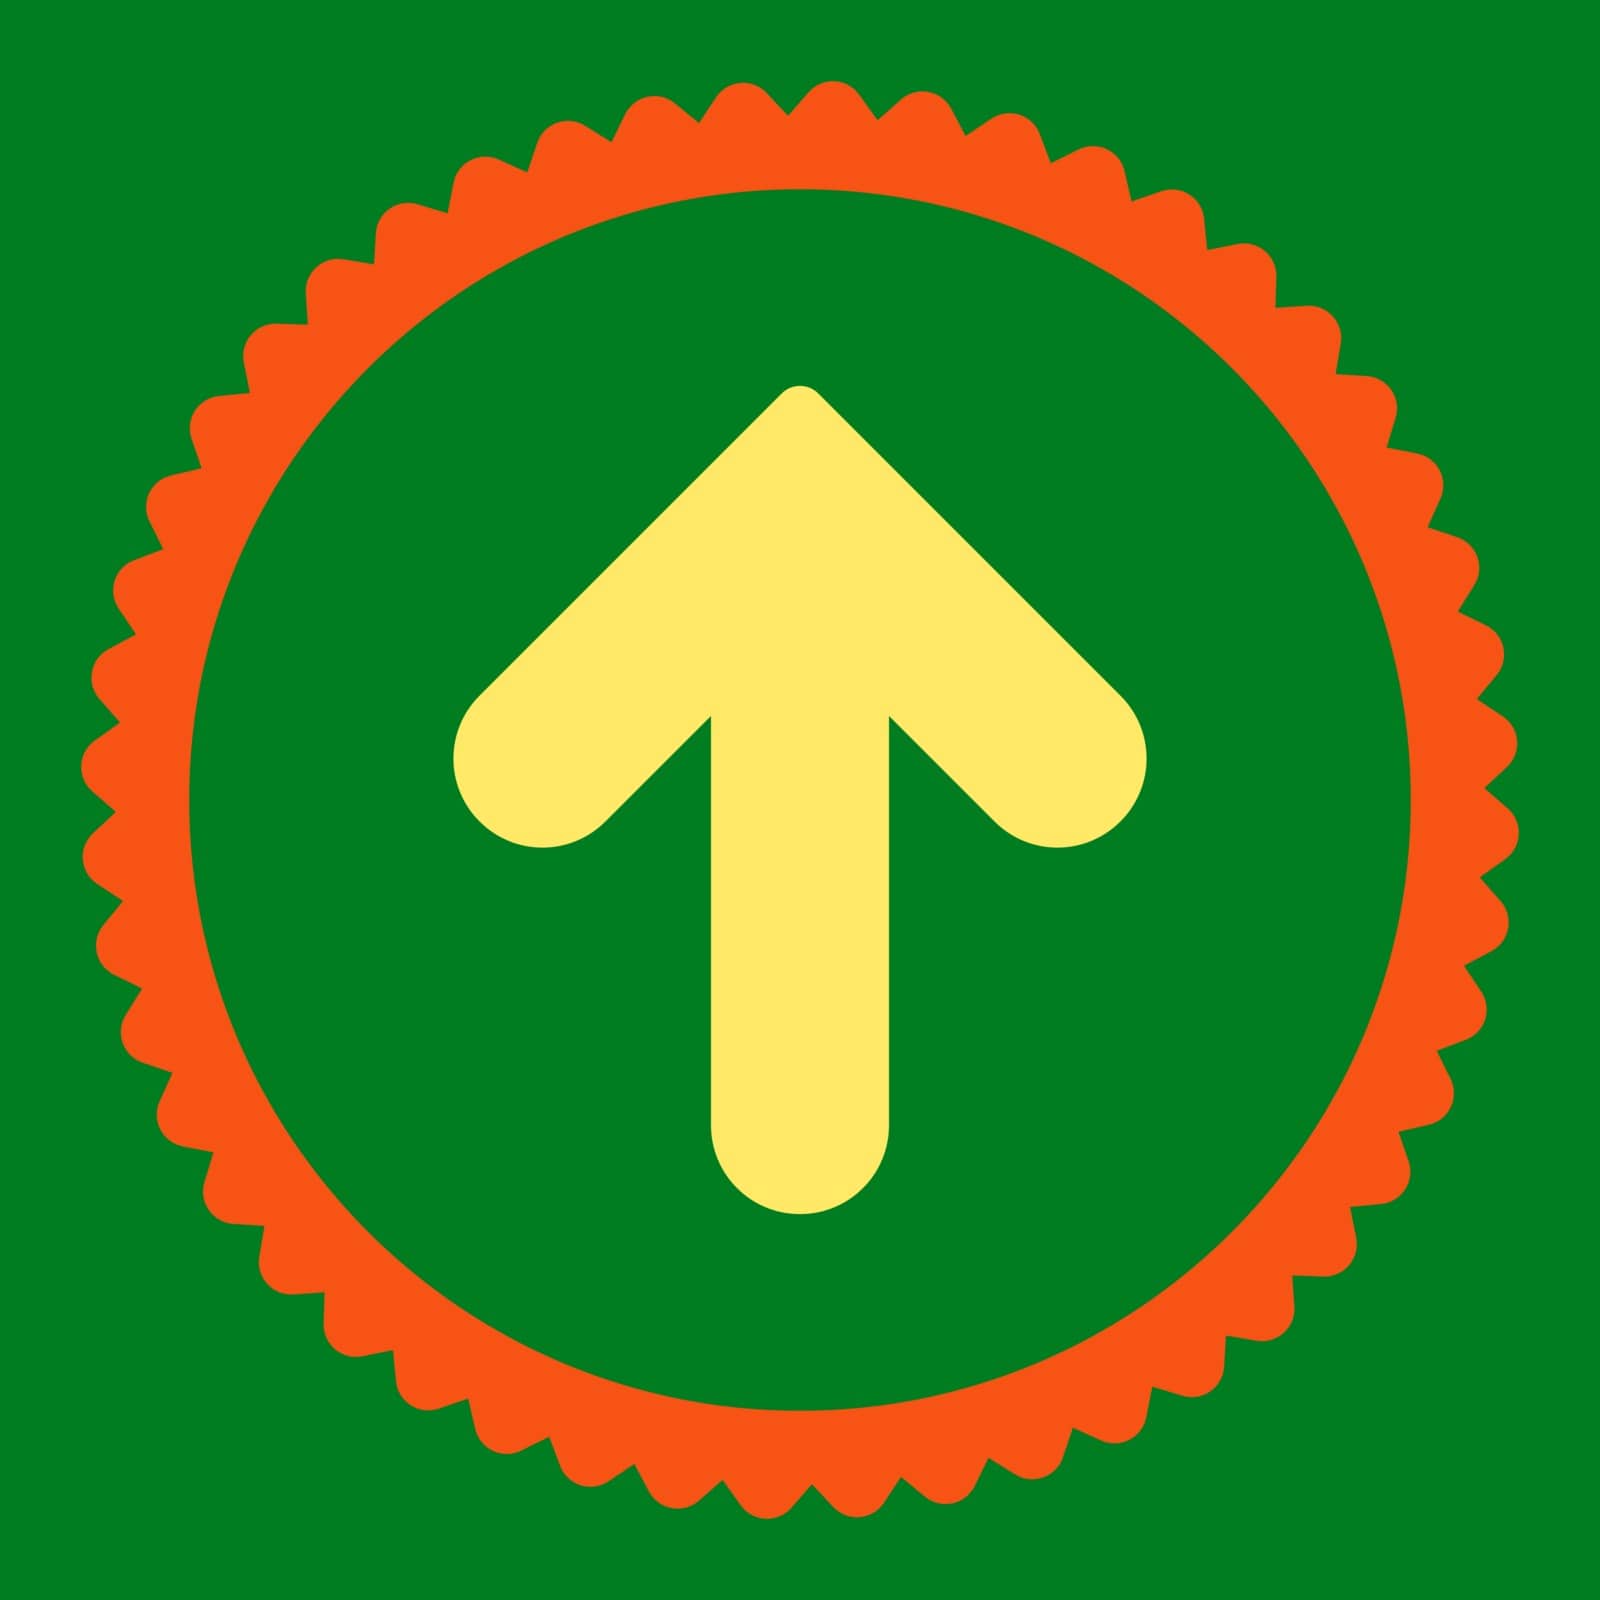 Arrow Up round stamp icon. This flat vector symbol is drawn with orange and yellow colors on a green background.